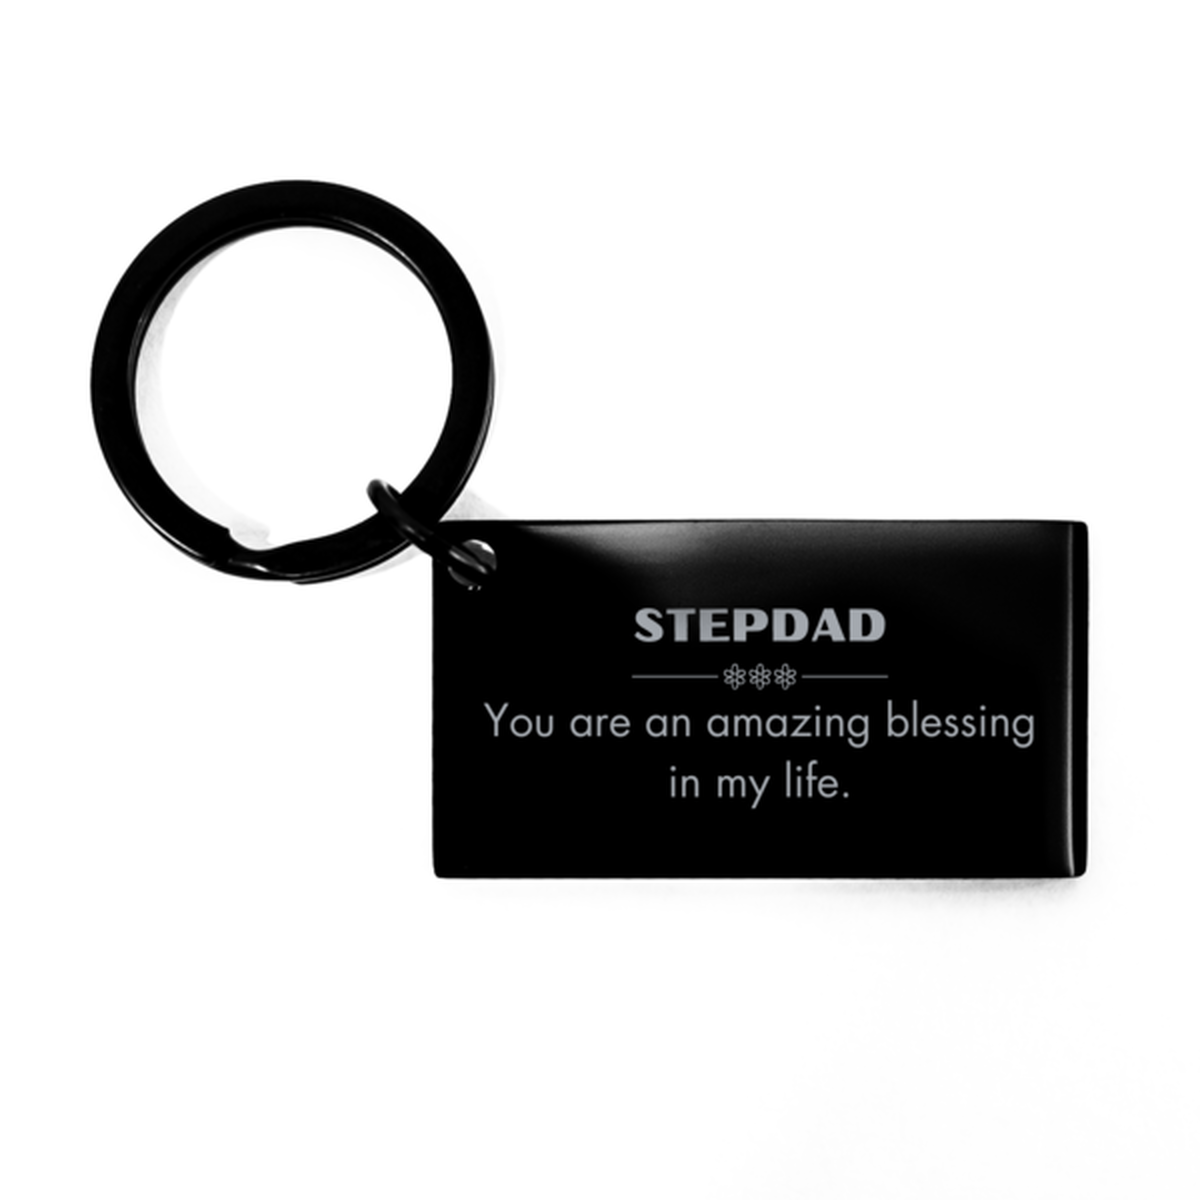 Stepdad Keychain, You are an amazing blessing in my life, Thank You Gifts For Stepdad, Inspirational Birthday Christmas Unique Gifts For Stepdad